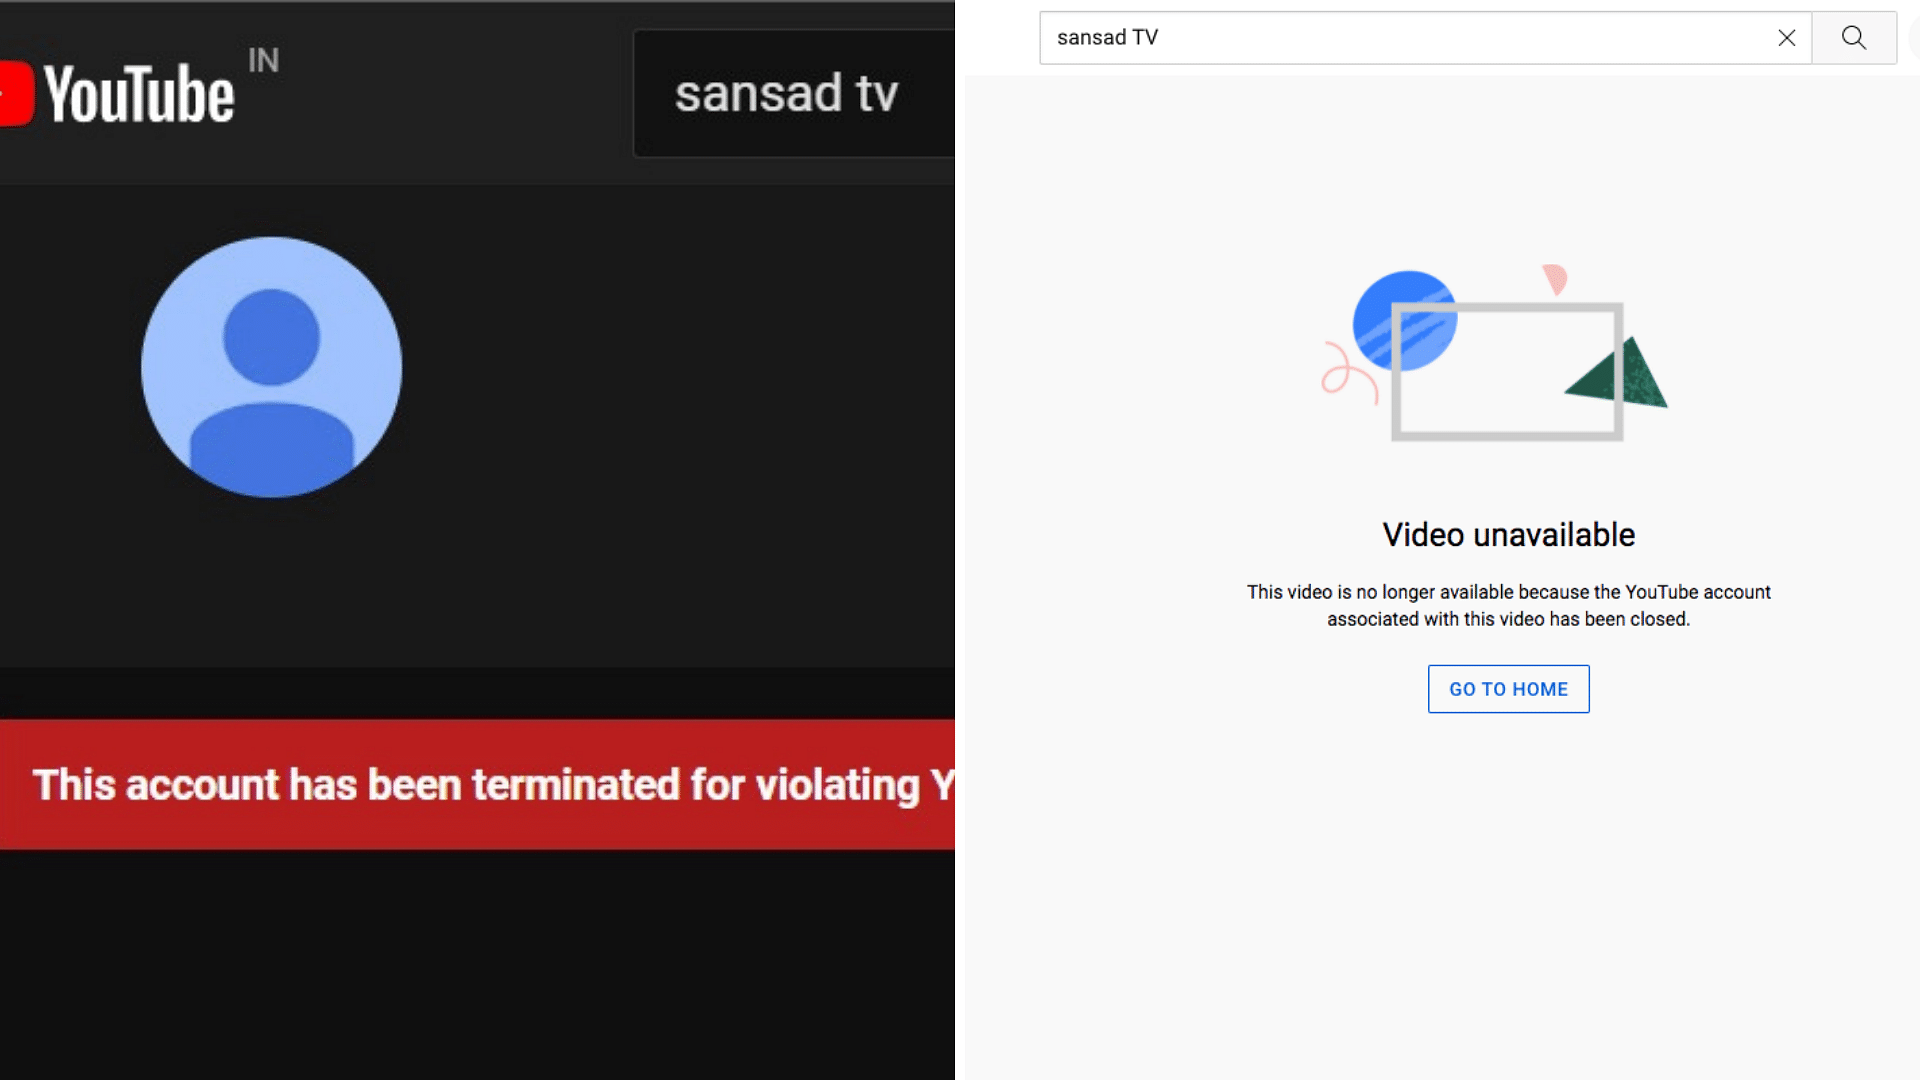 <div class="paragraphs"><p>Sansad TV's YouTube account, which broadcasts Rajya Sabha and Lok Sabha proceedings when Parliament is in session, has been “terminated for violating YouTube’s Community Guidelines.”</p></div>